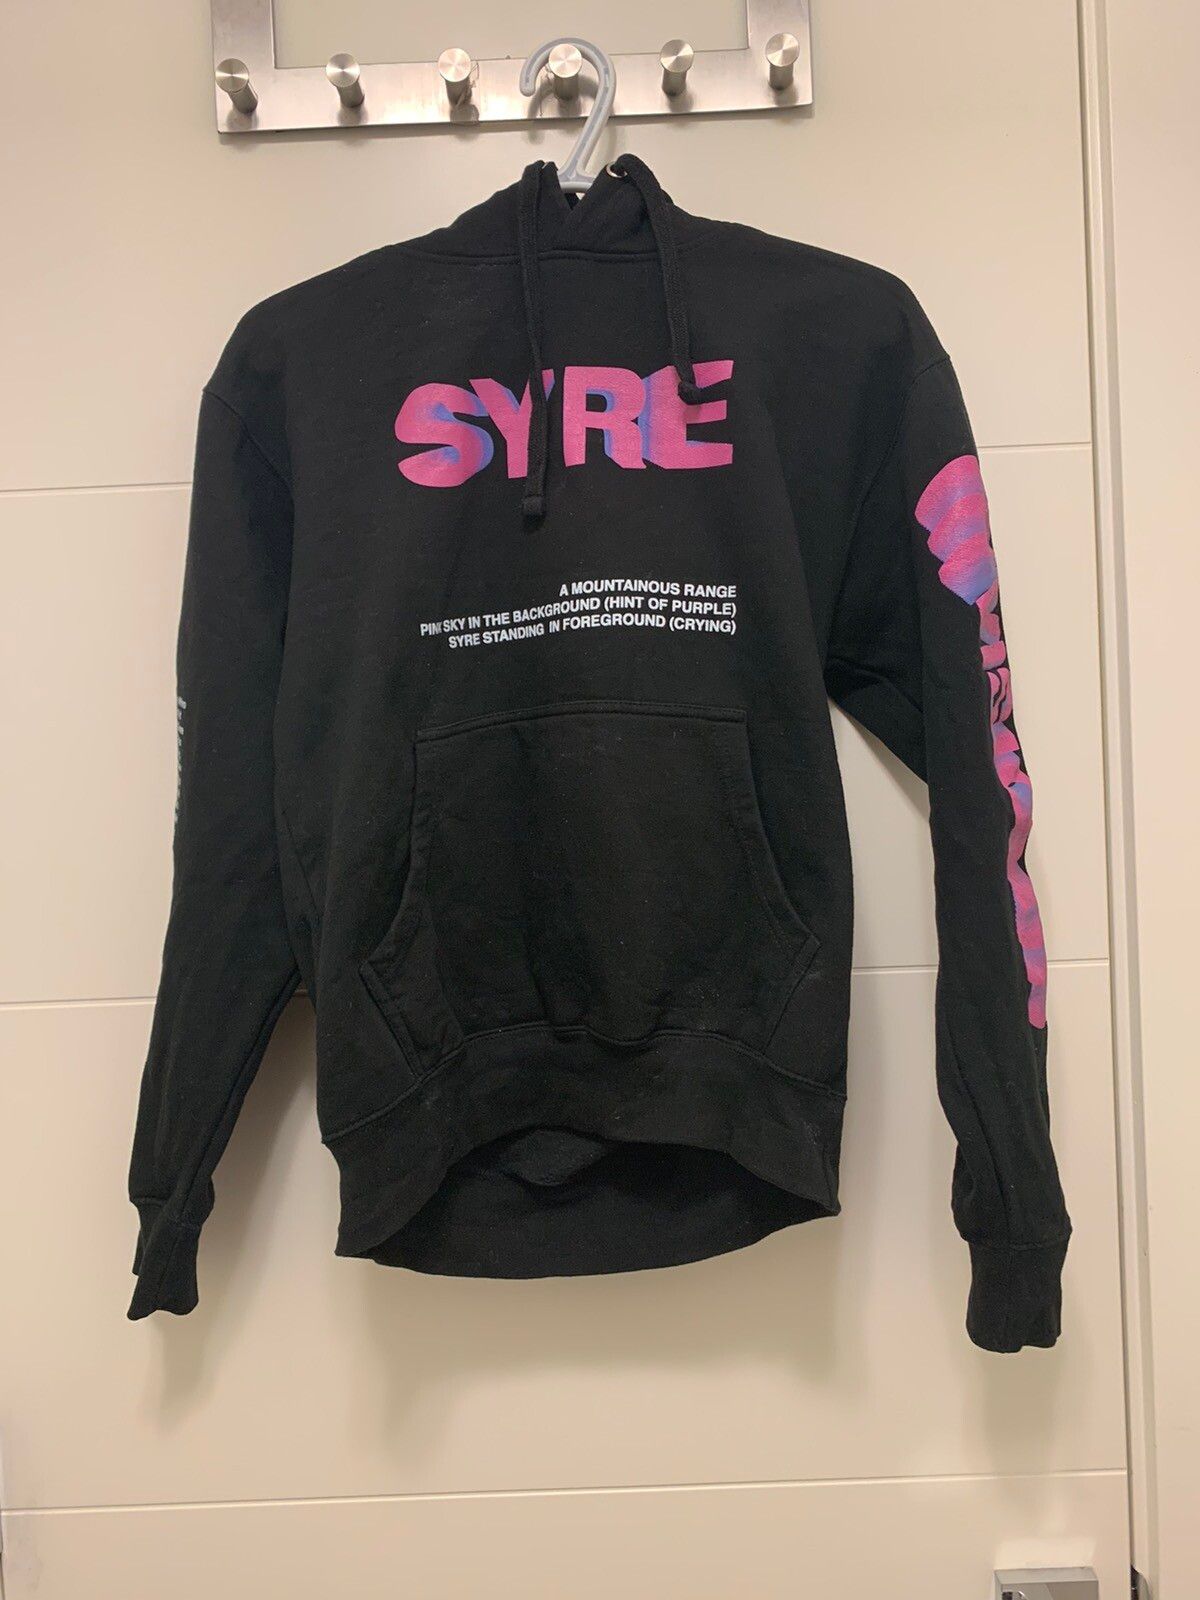 Msftsrep Jaden Smith MSFTsrep Syre Tour Hoodie Size US S / EU 44-46 / 1 - 1 Preview